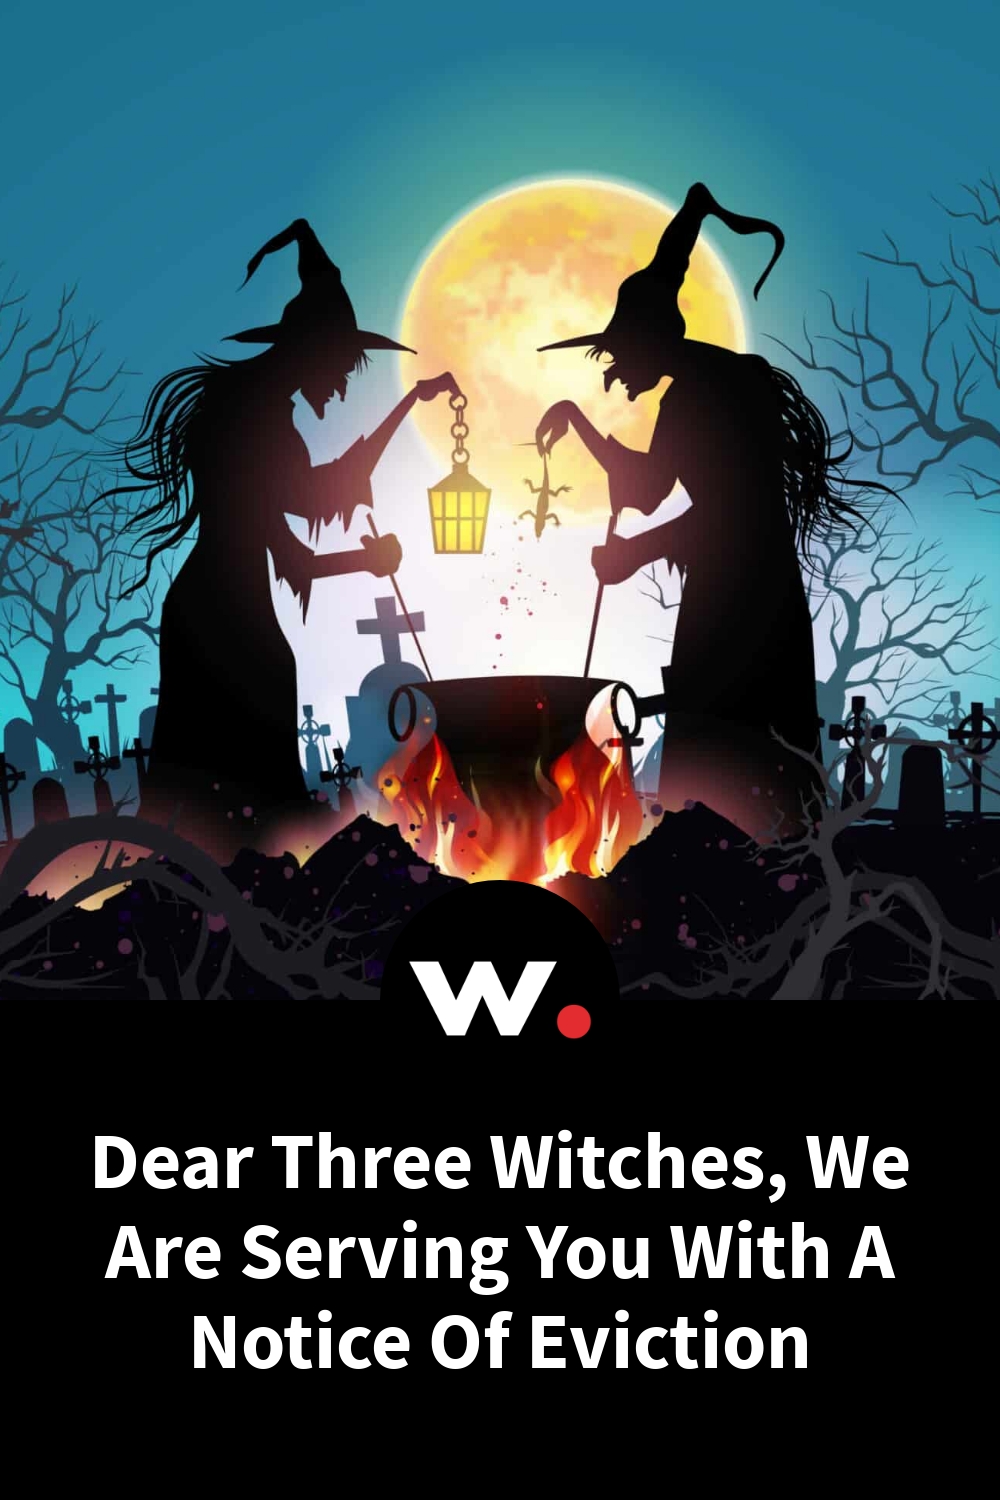 Dear Three Witches, We Are Serving You With A Notice Of Eviction